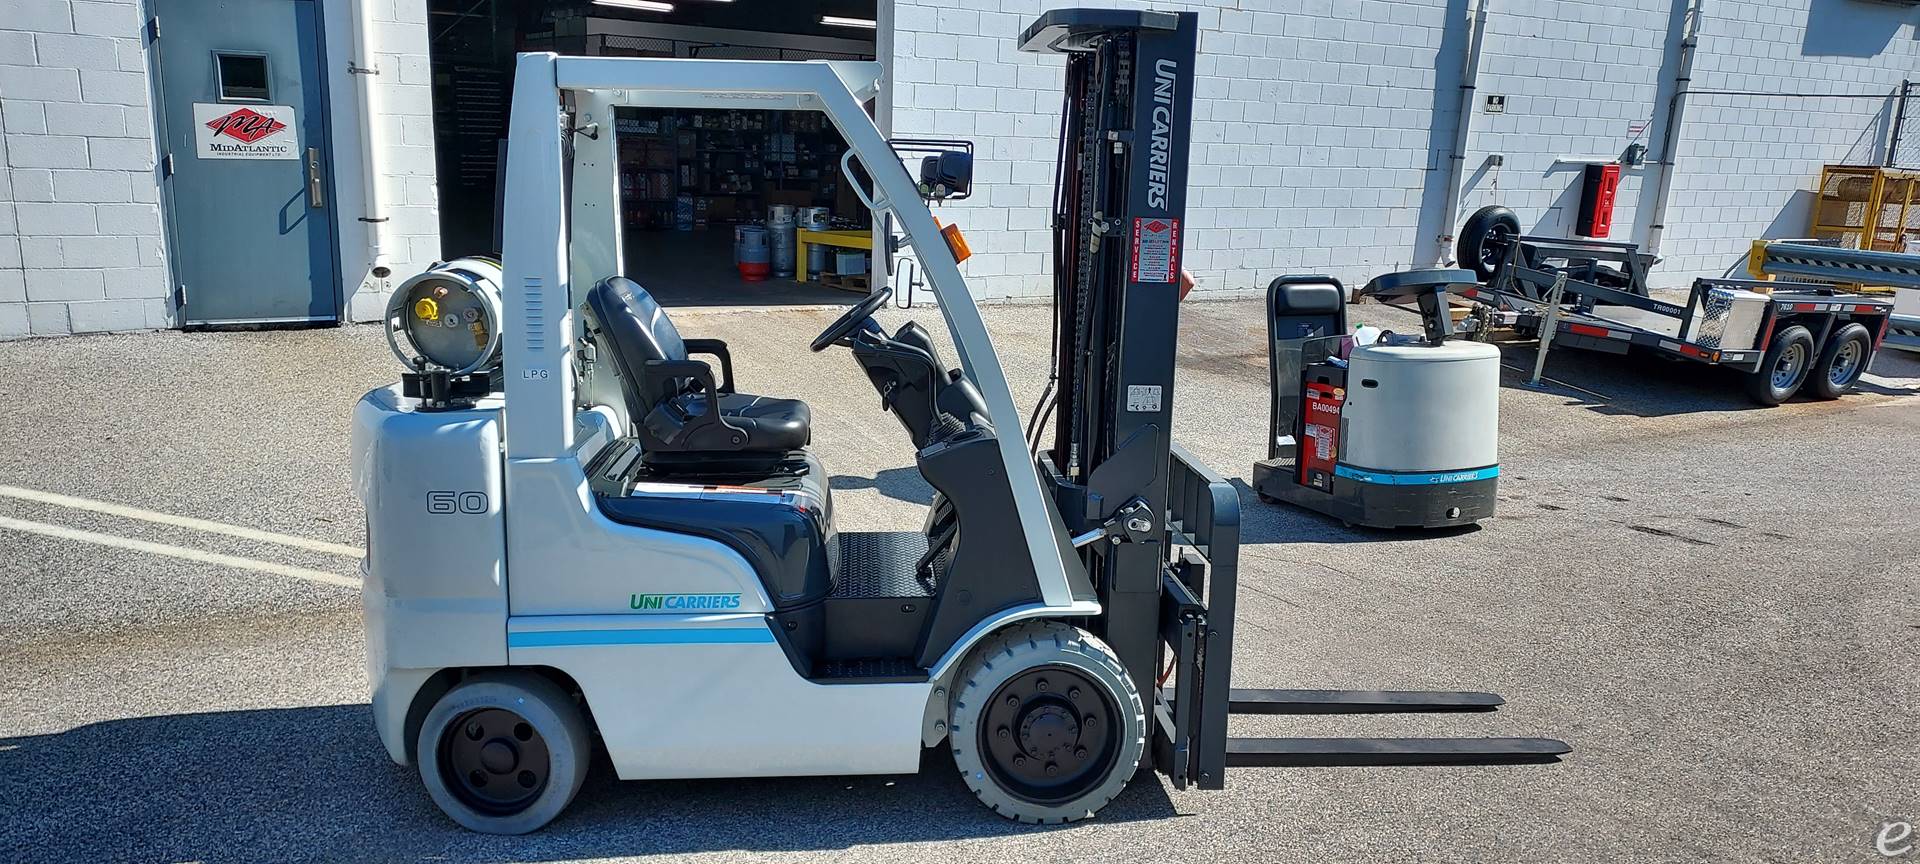 2015 Unicarriers MCUG1F2F30LV- CF60LP Cushion Tire Forklift - 123Forklift